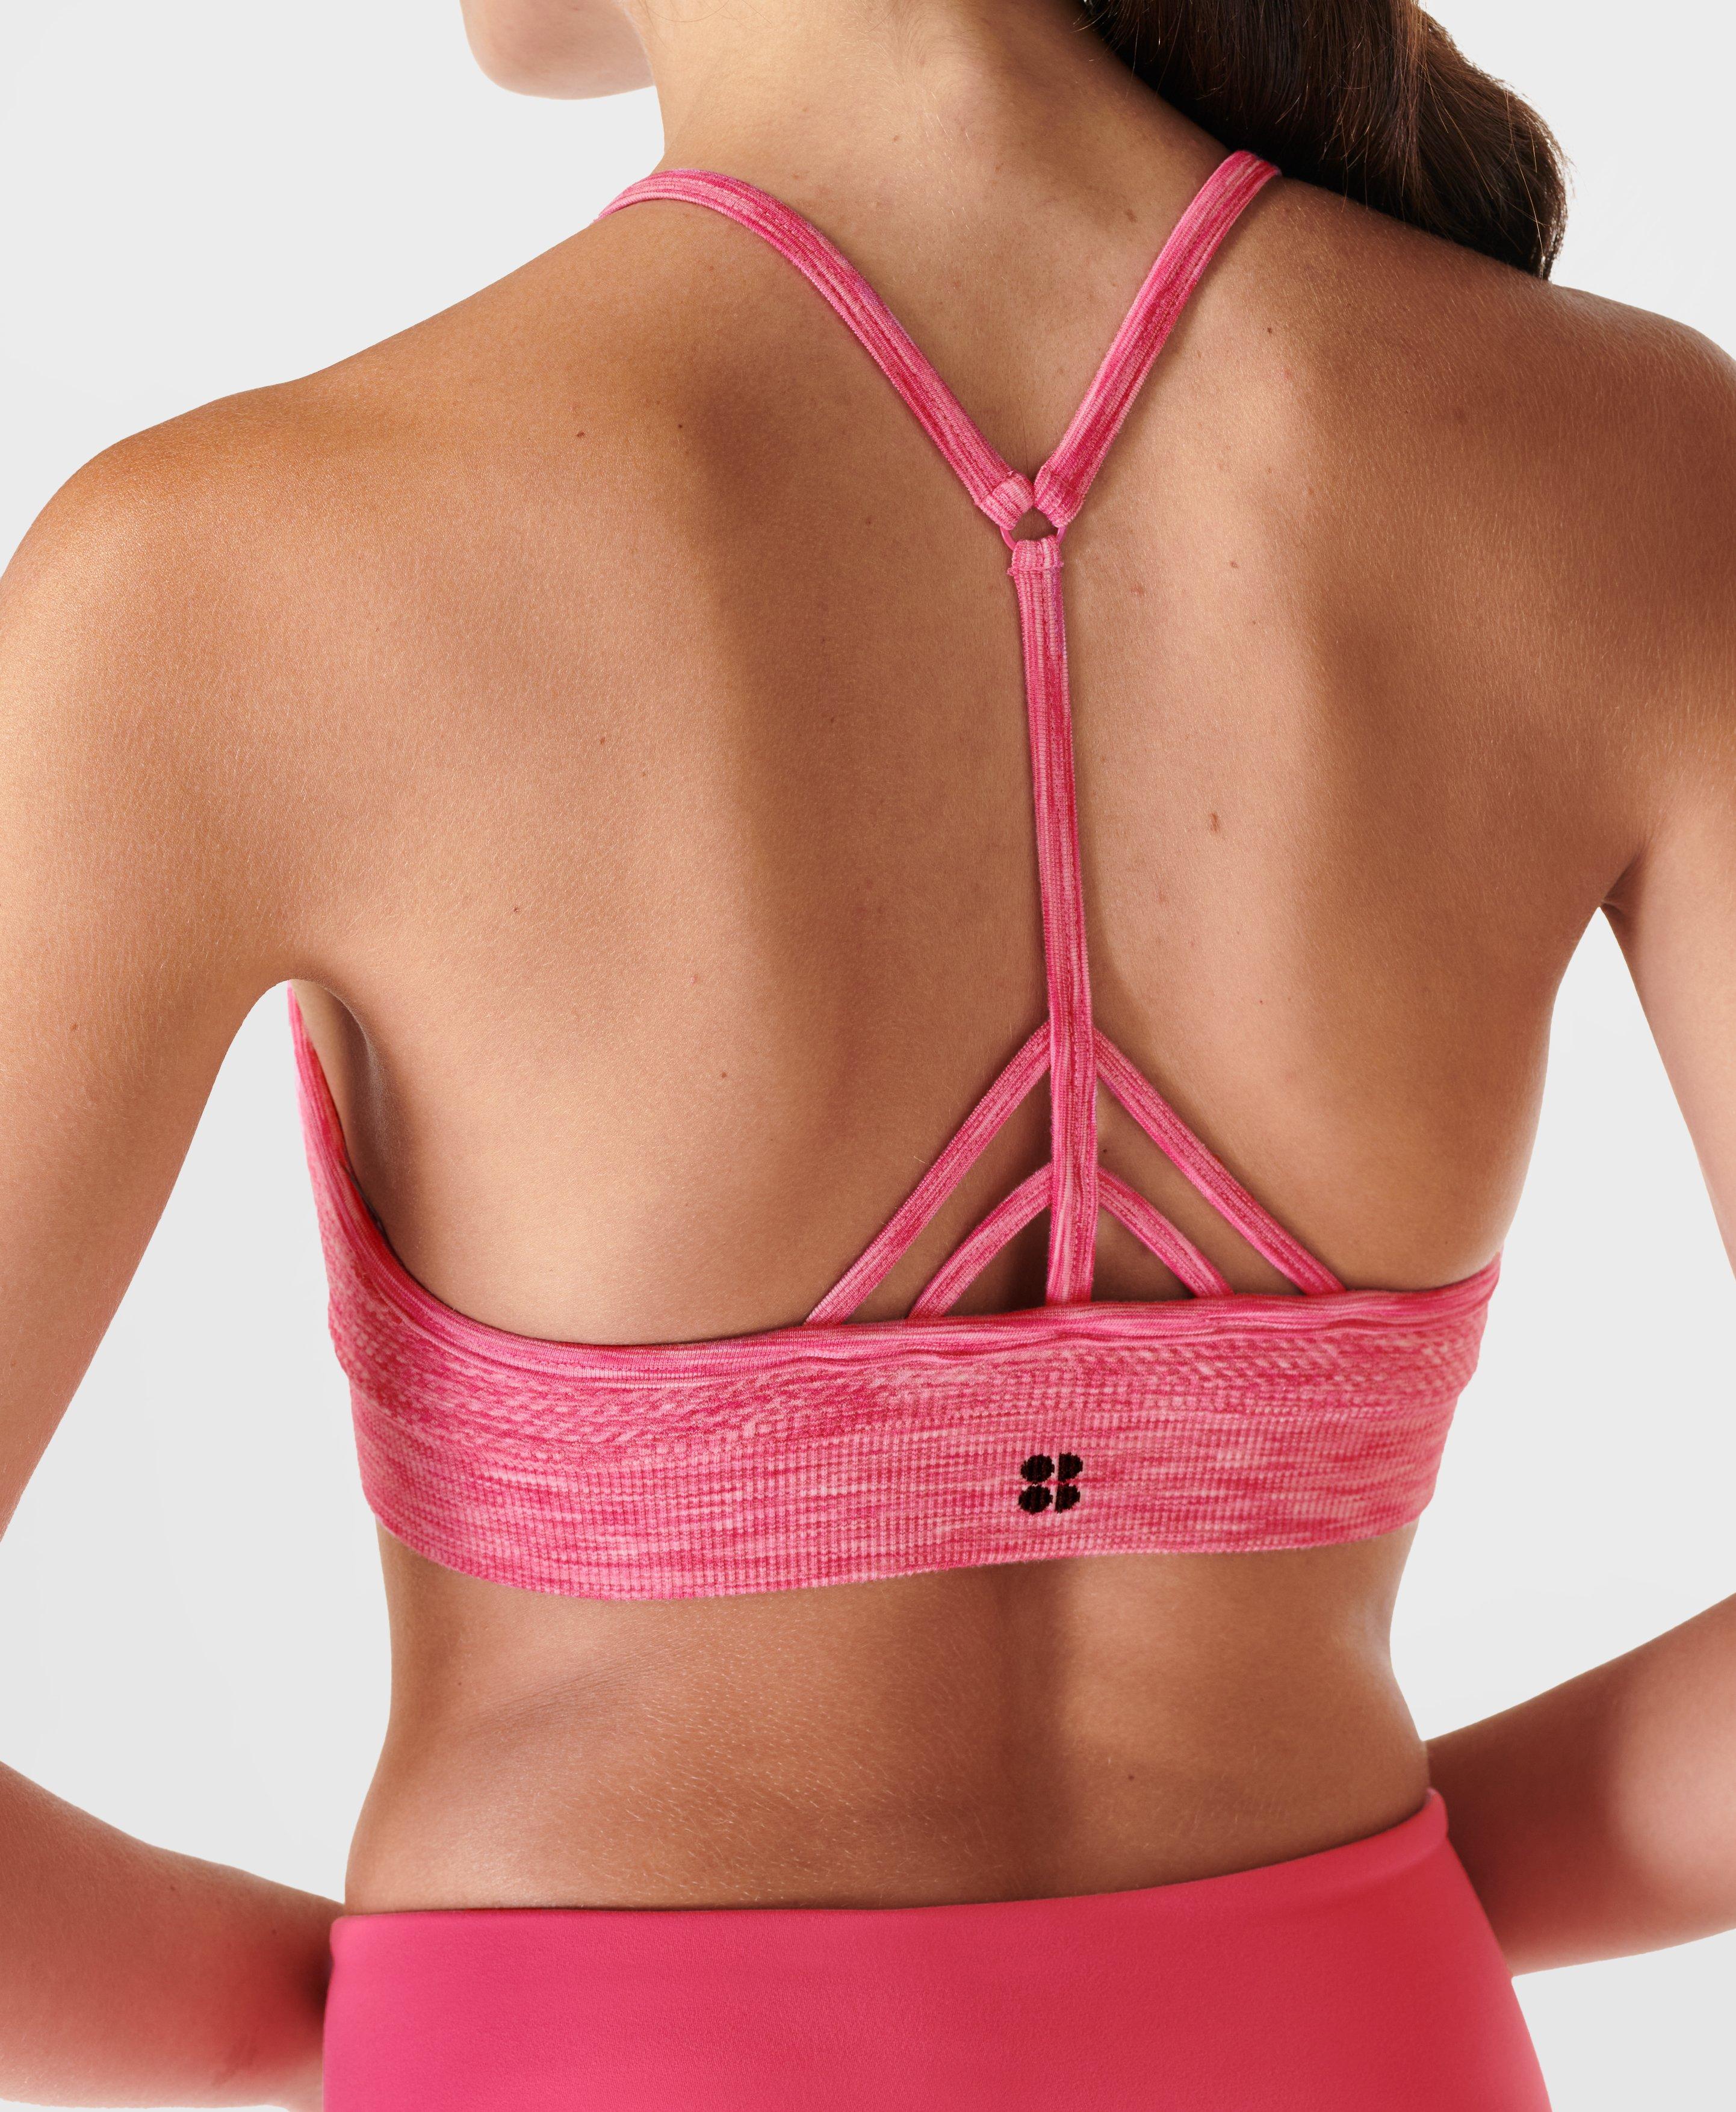 Monday morning stretch and yoga💗 Energy high neck bra in Pink